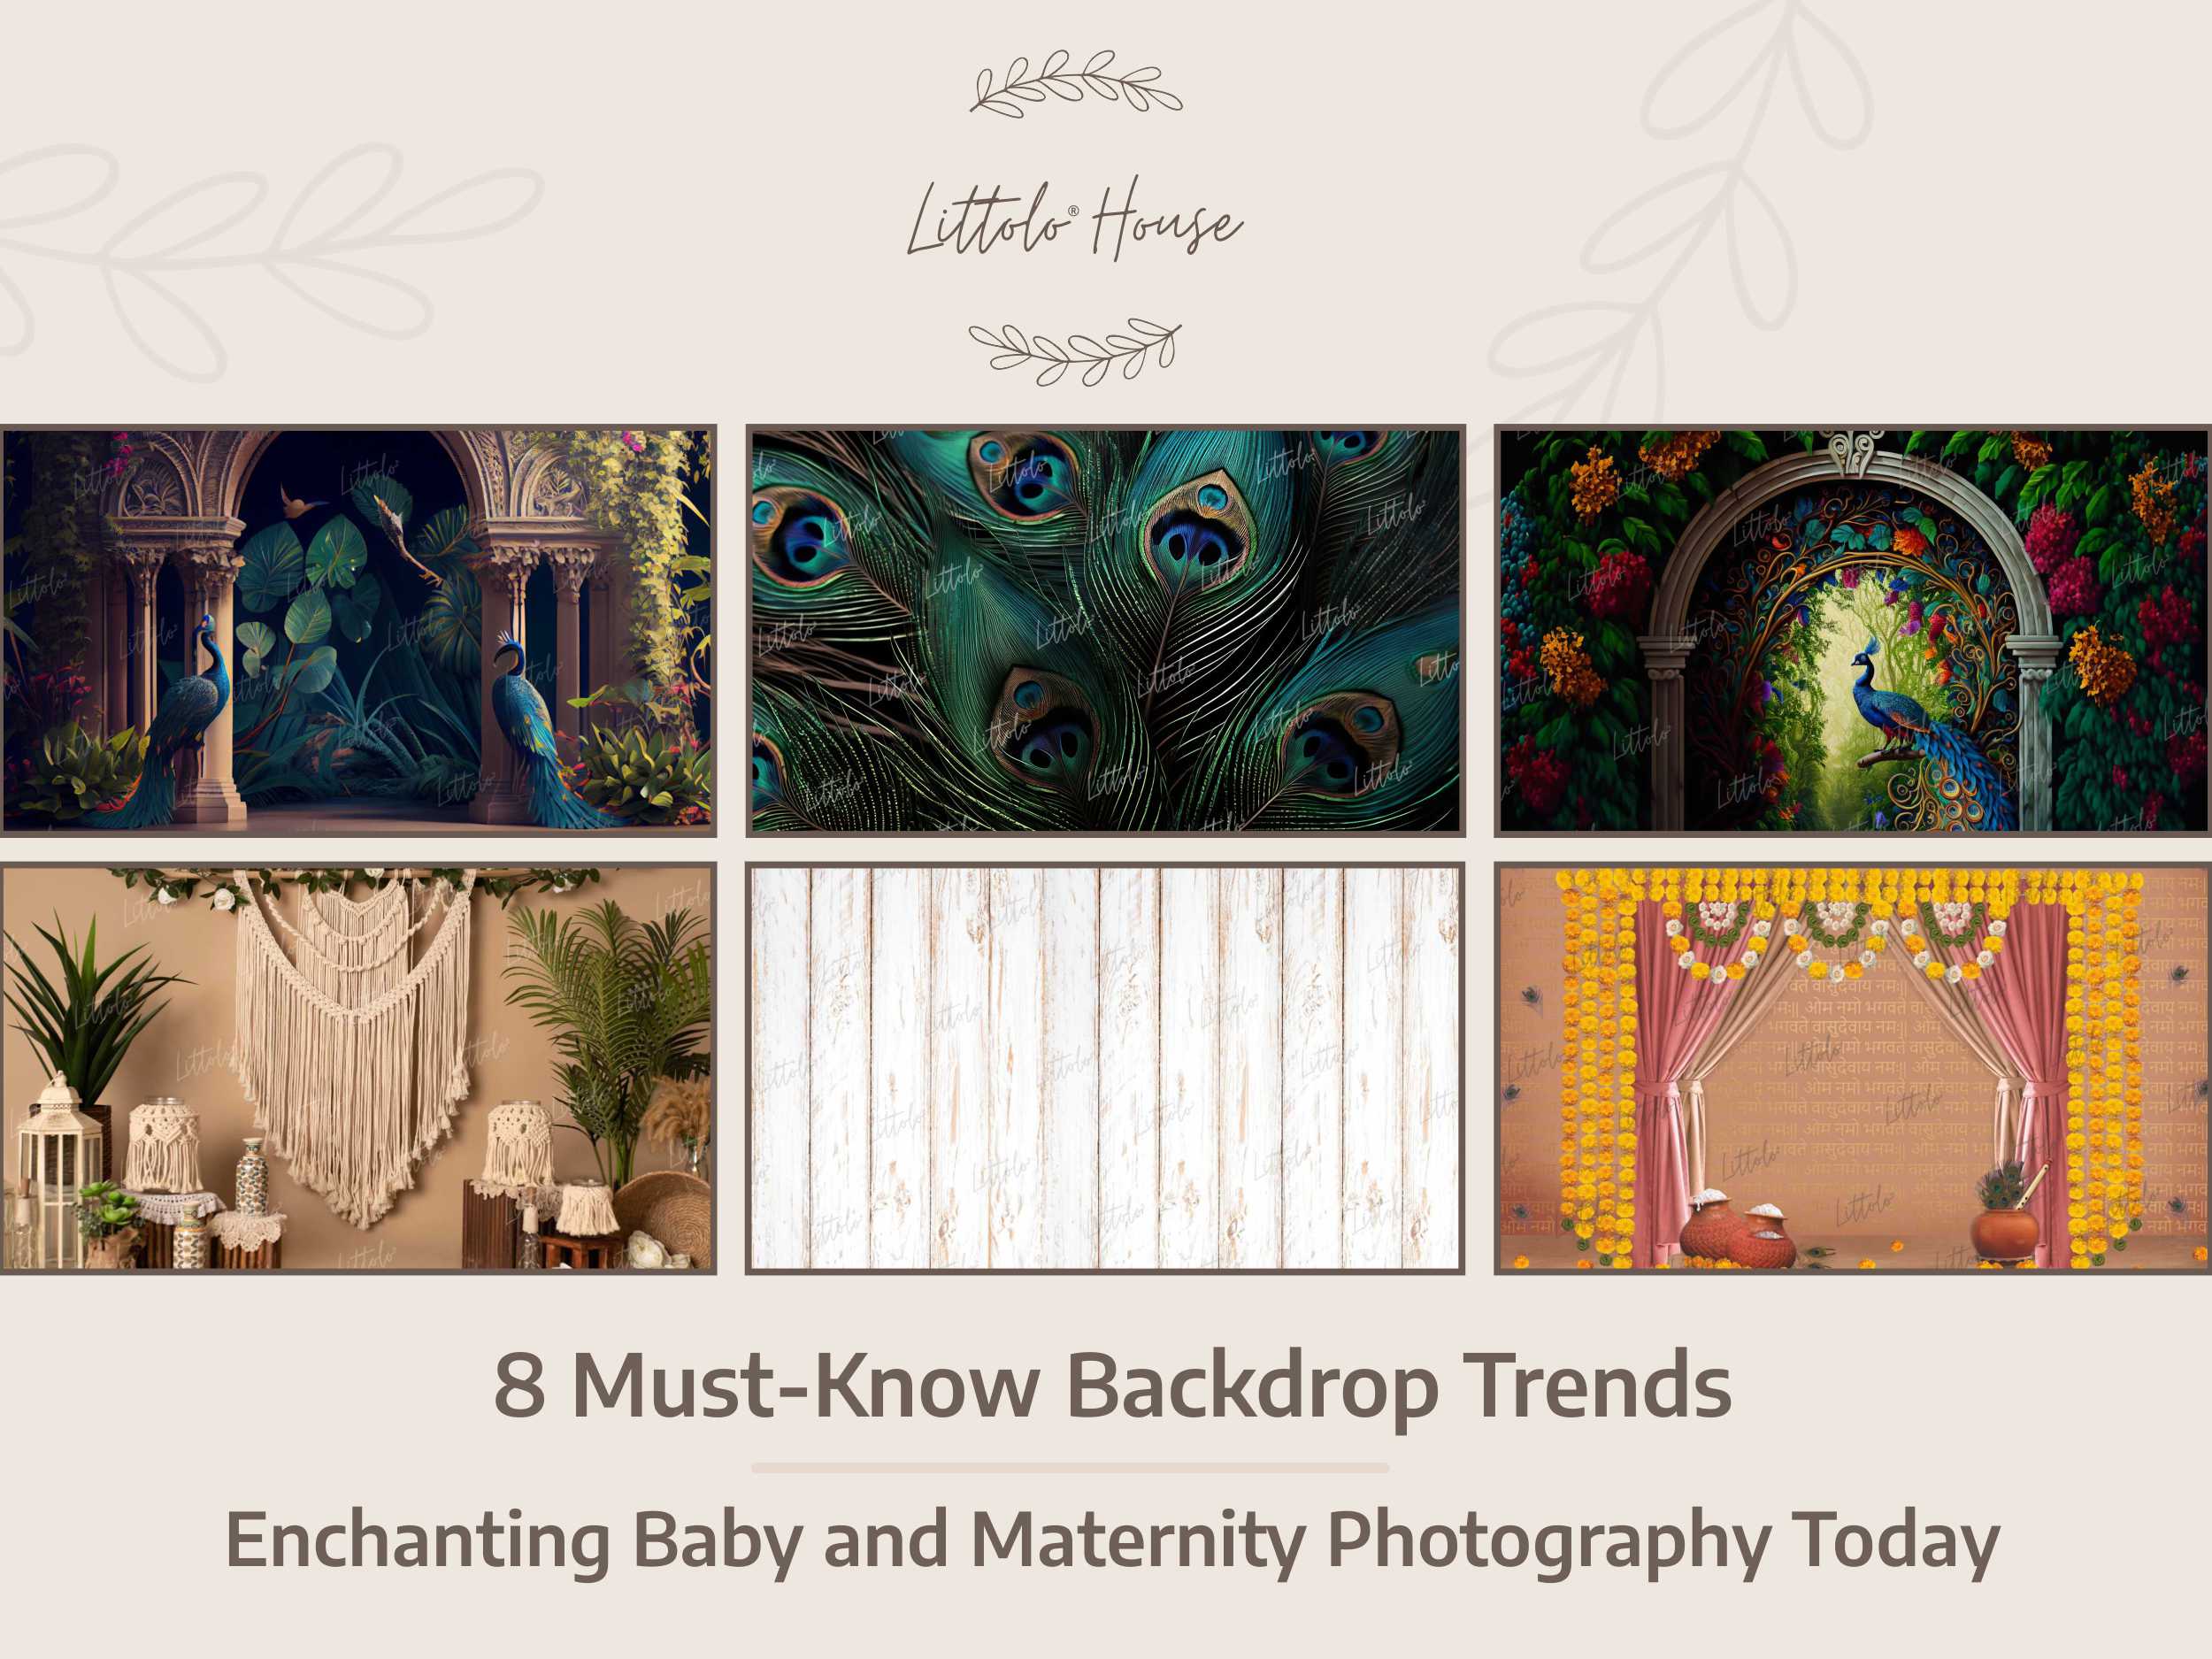 8 Must-Know Backdrop Trends: Enchanting Baby and Maternity Photography Today